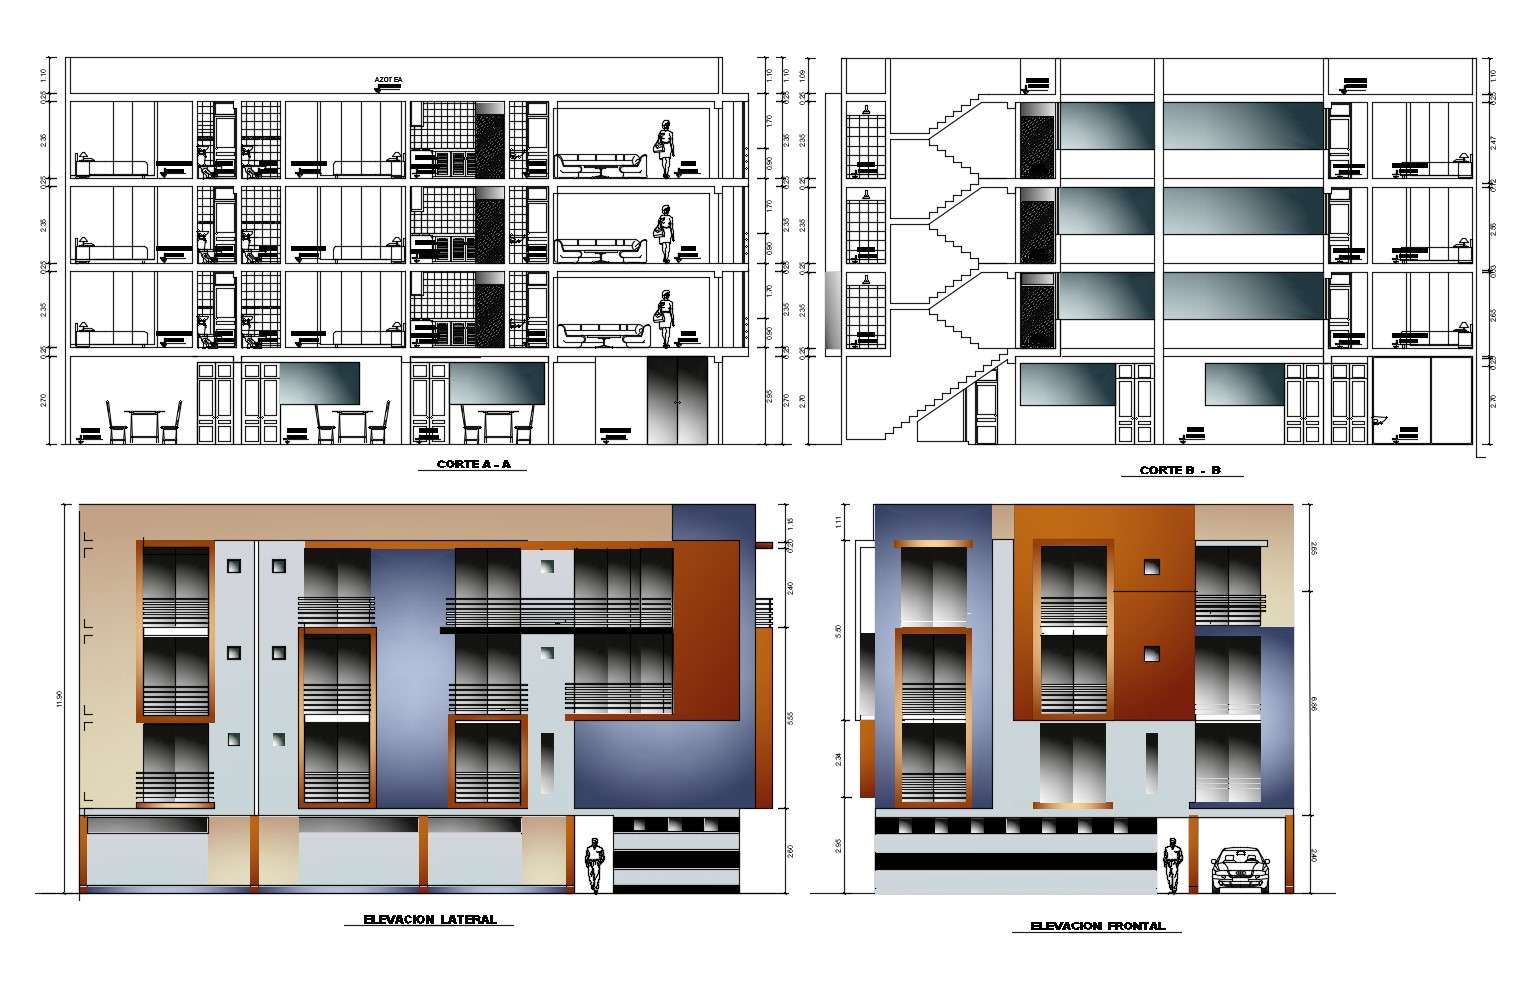 Elevation drawing of the residential building with detail dimension in